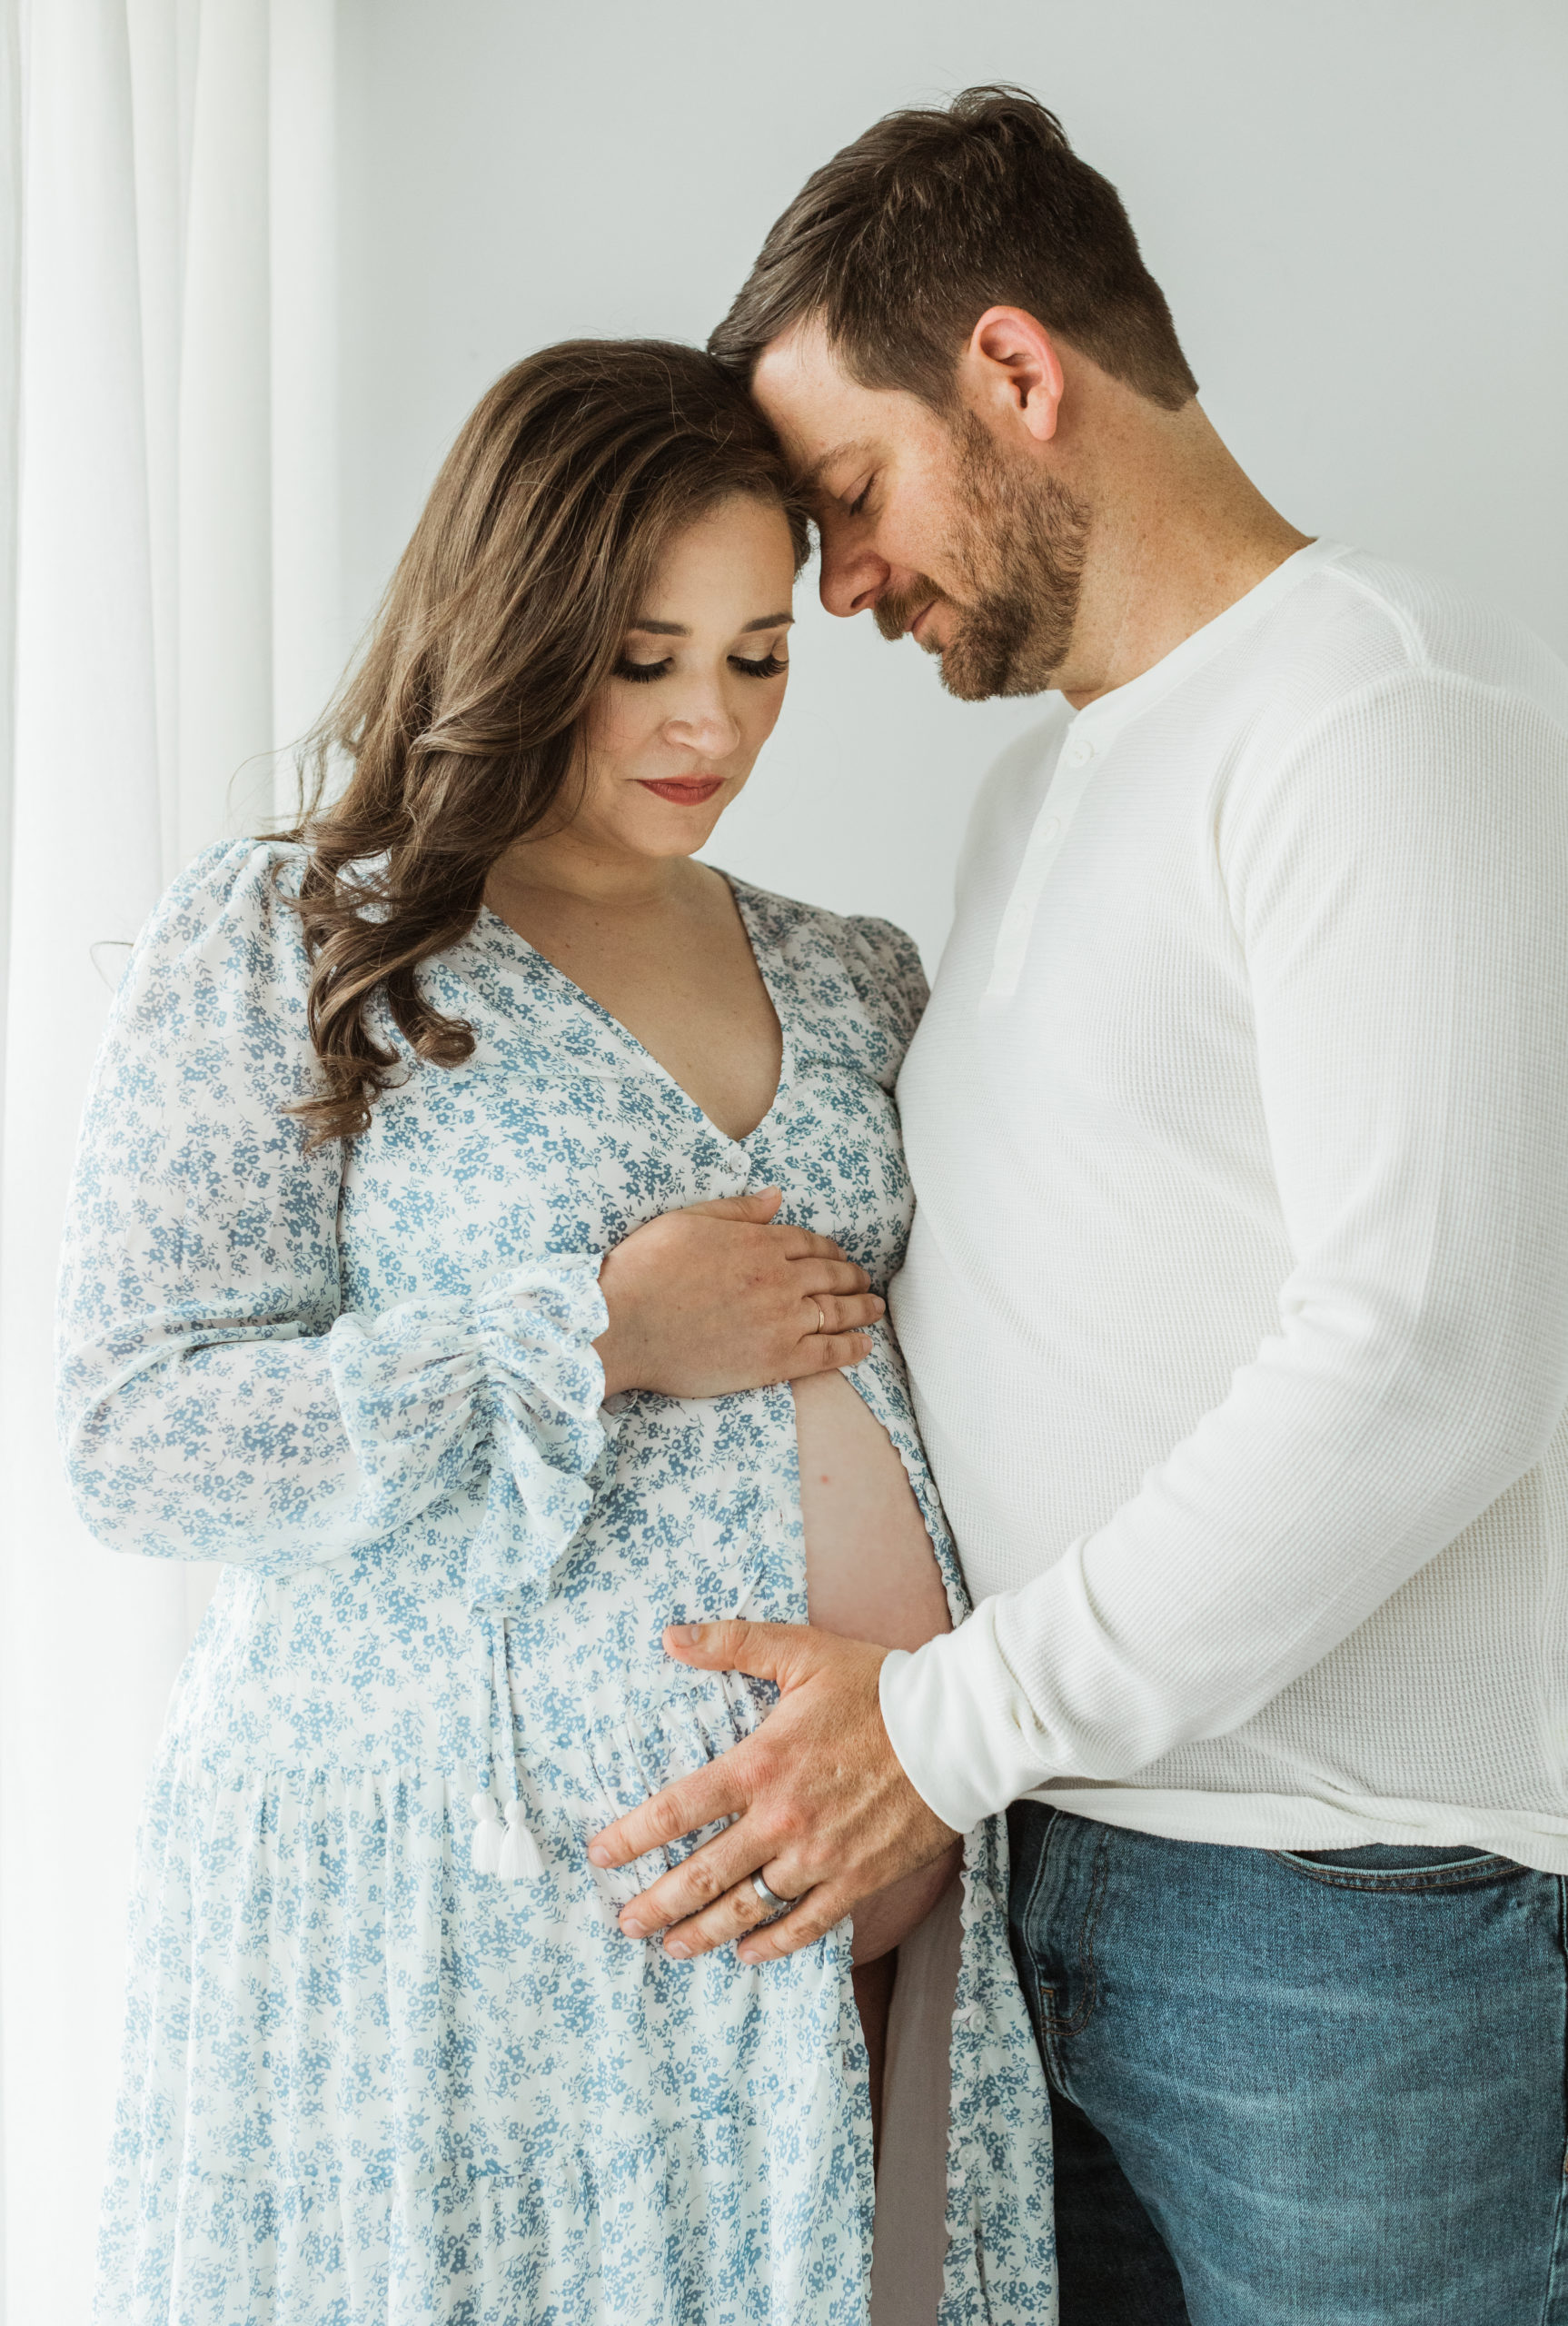 Husband and expecting wife. First time mama wearing white and blue floral cover up. Man wearing white long sleeve and jeans.